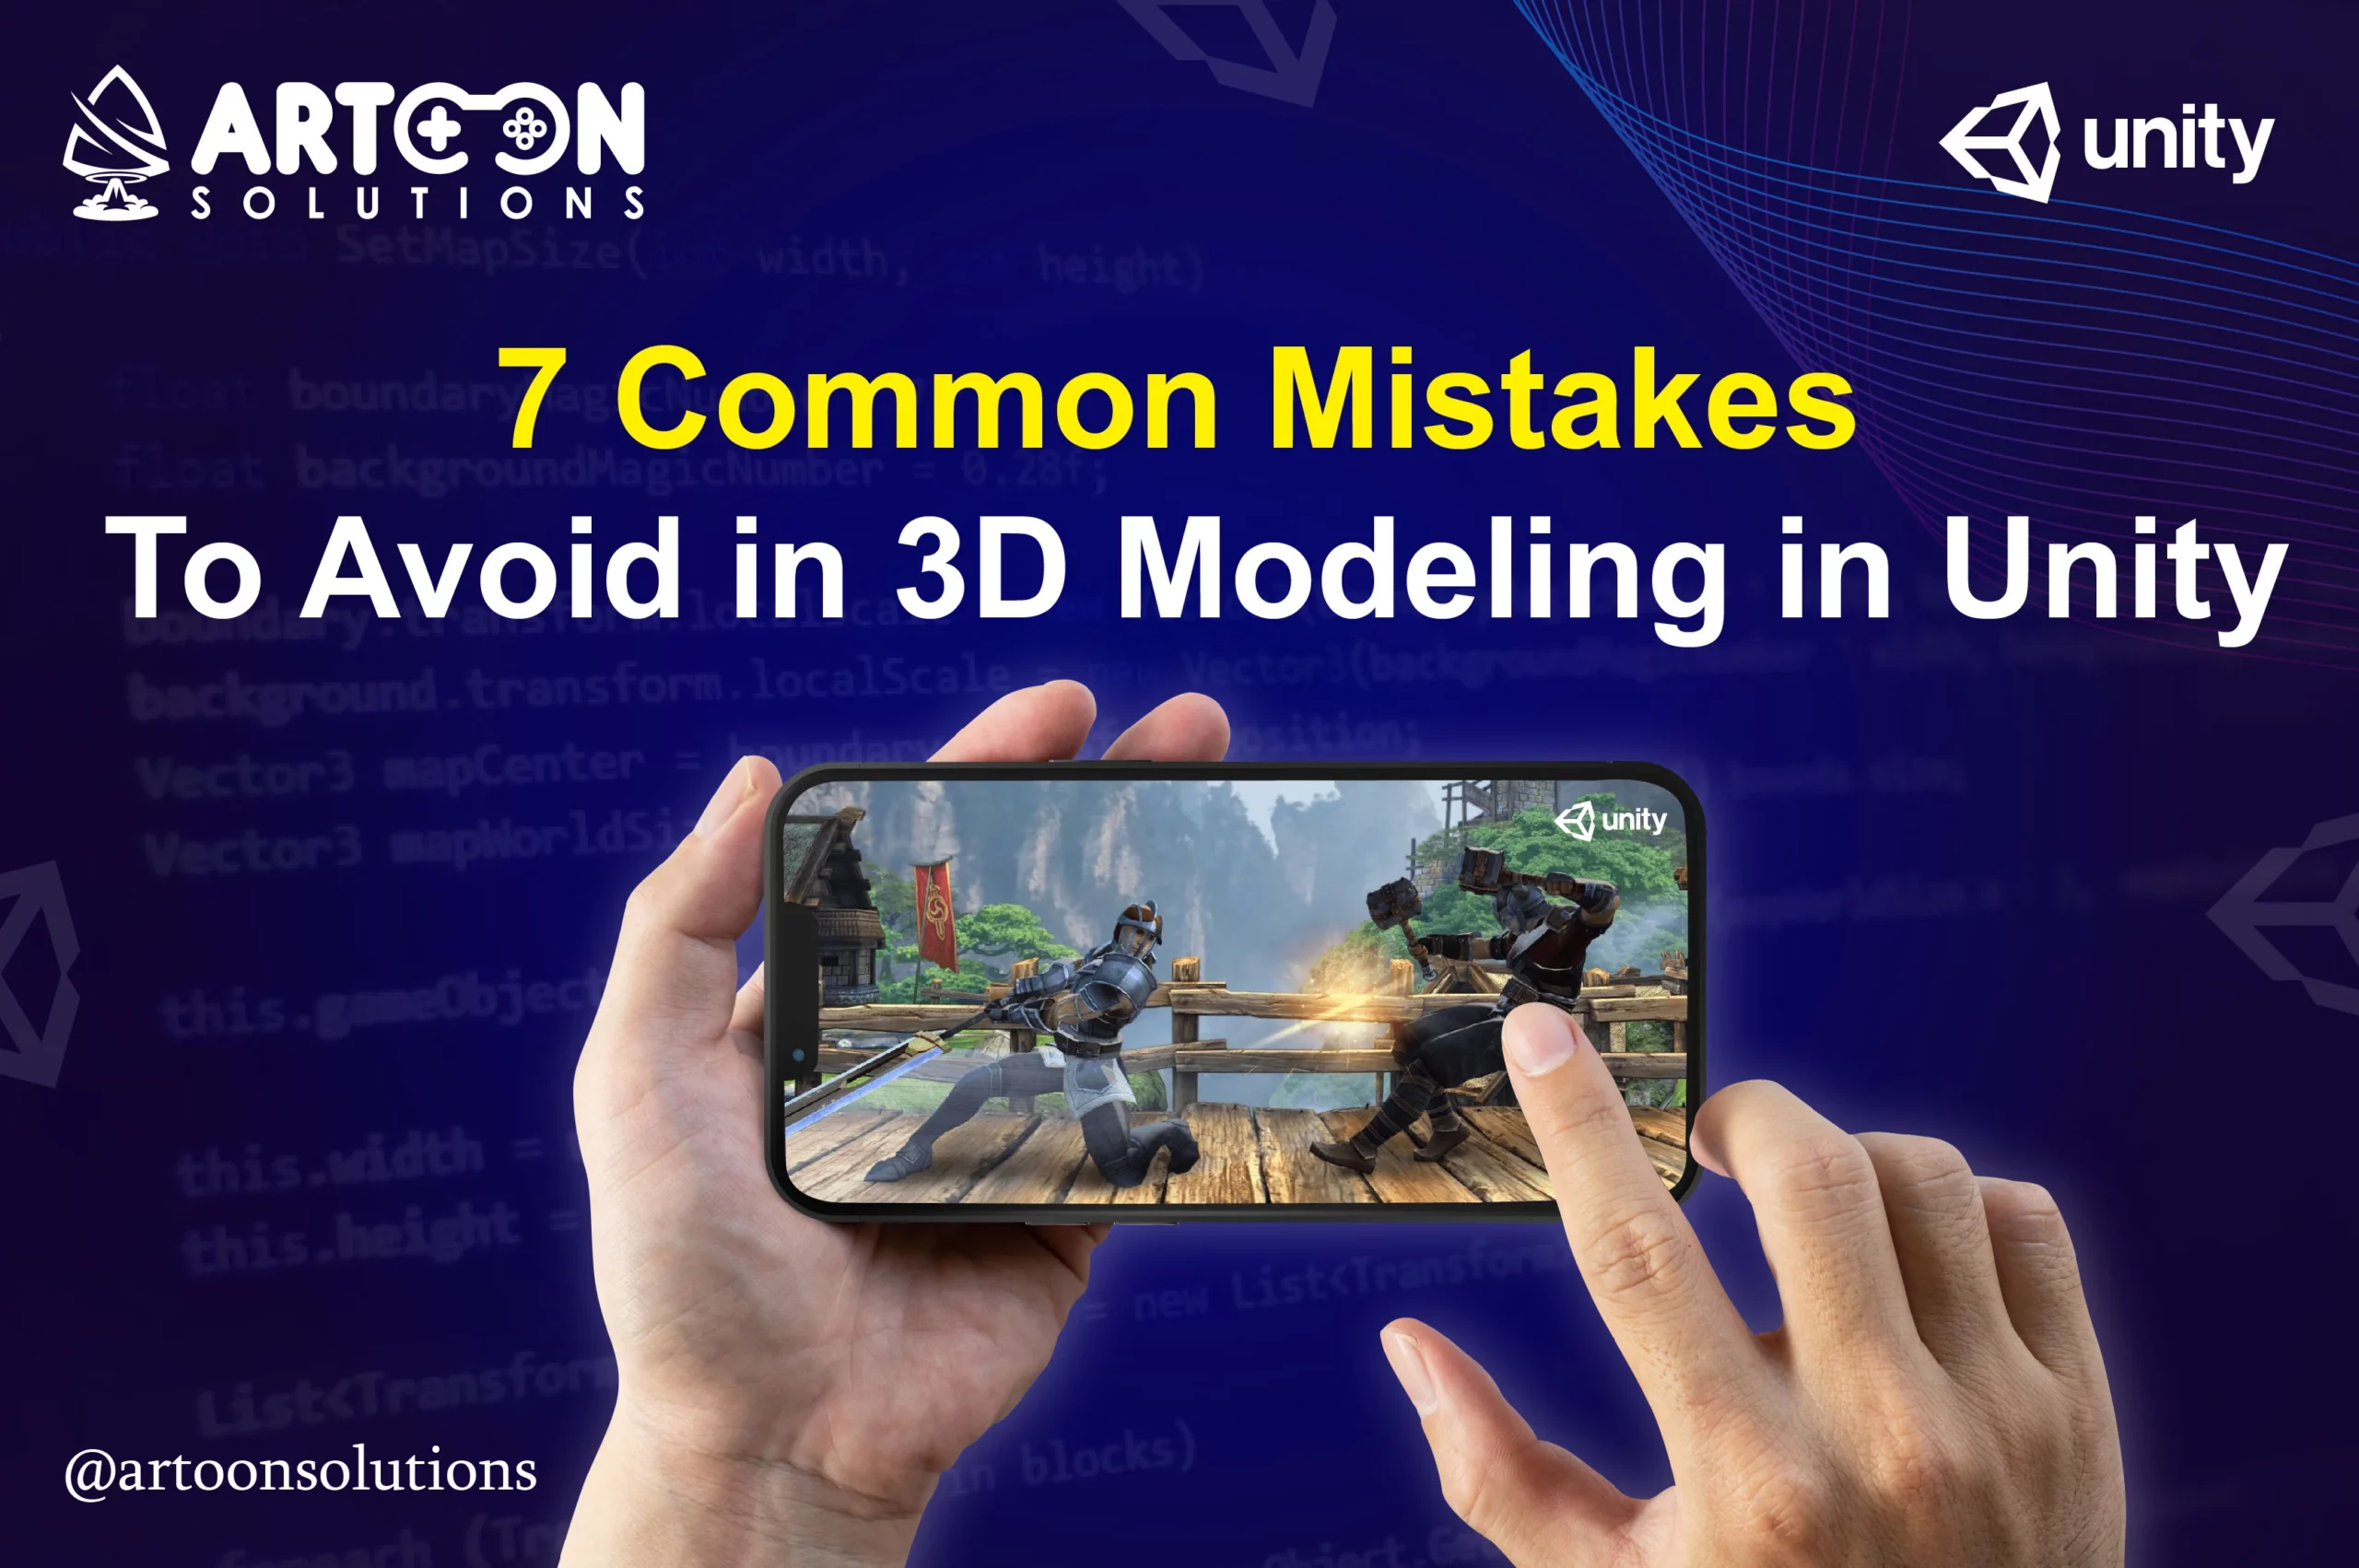 7 Common Mistakes To Avoid in 3D Modeling in Unity